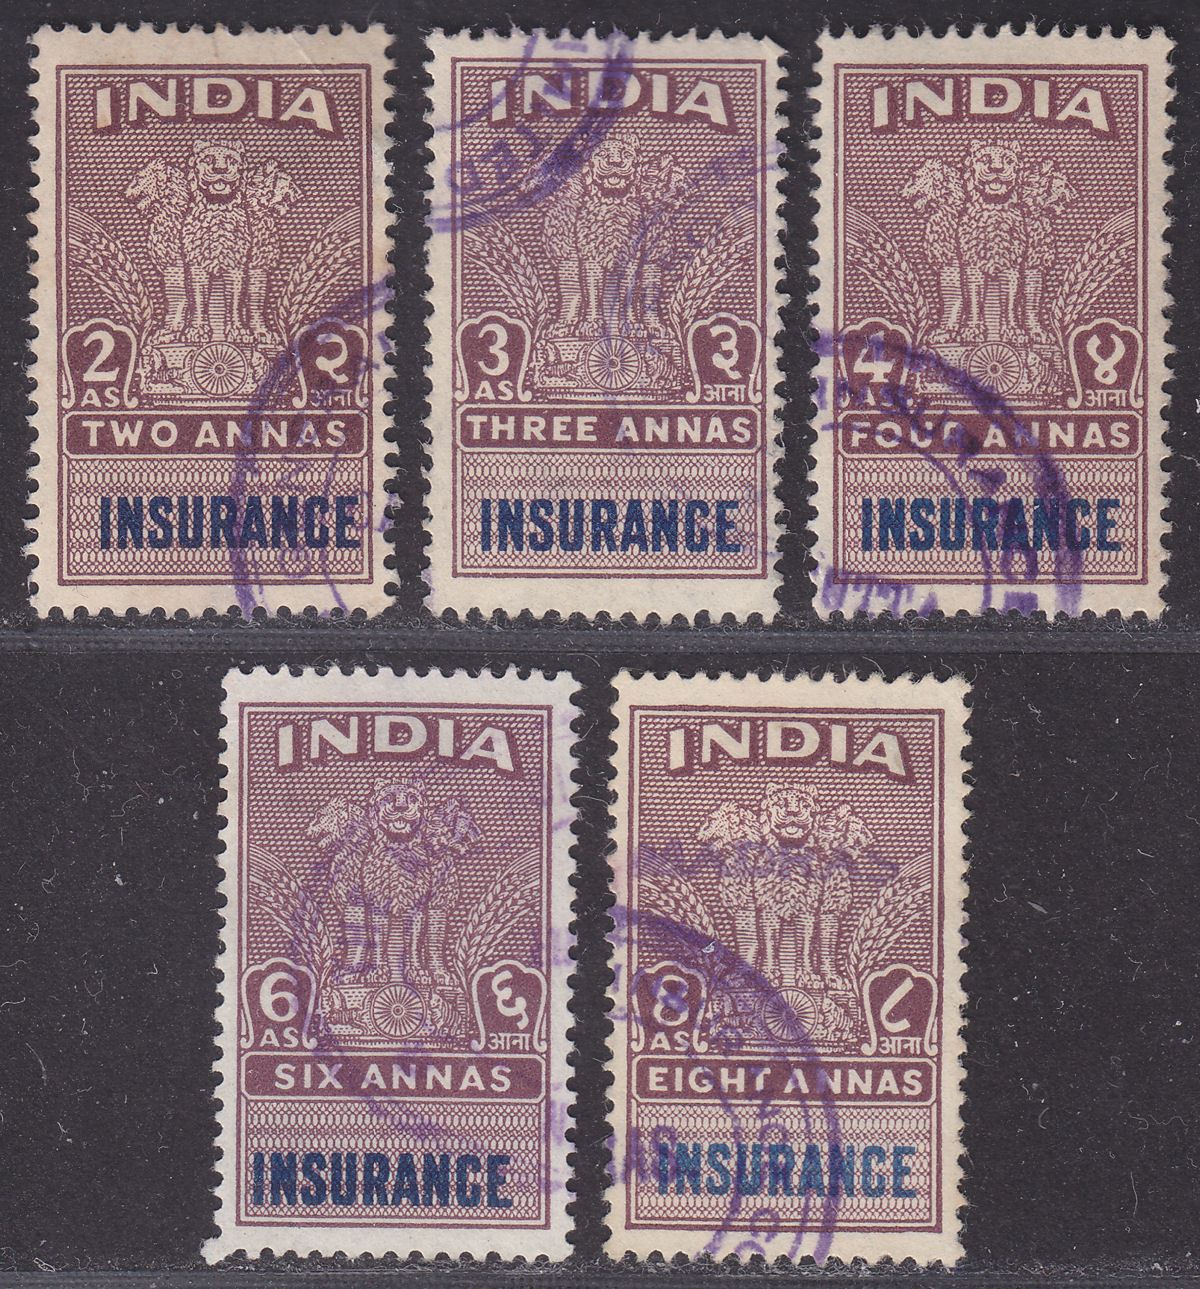 India 1948 Revenue Insurance Selection 2a - 8a Used BF68-72